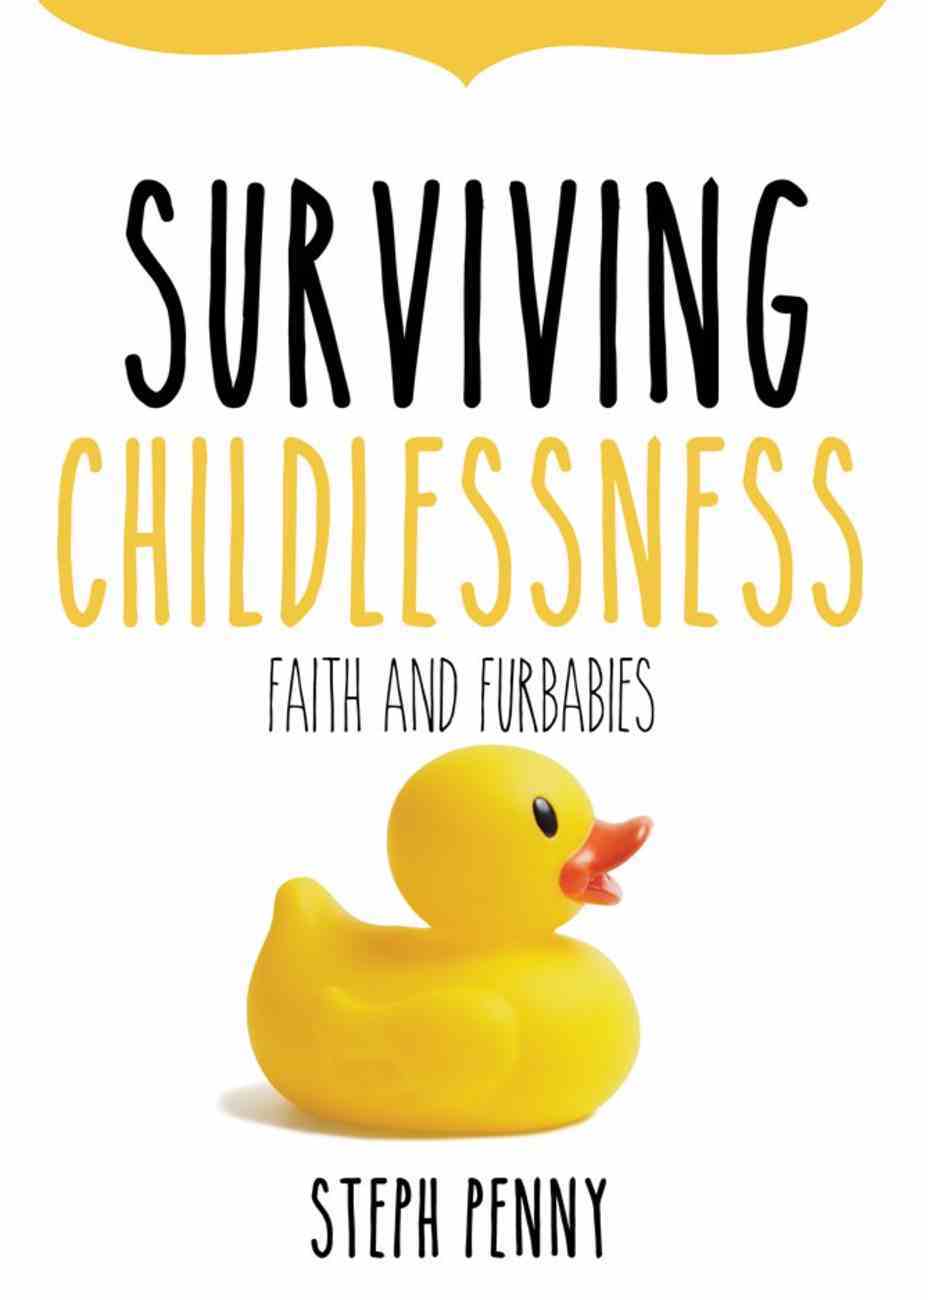 Surviving Childlessness: Faith and Furbabies Paperback